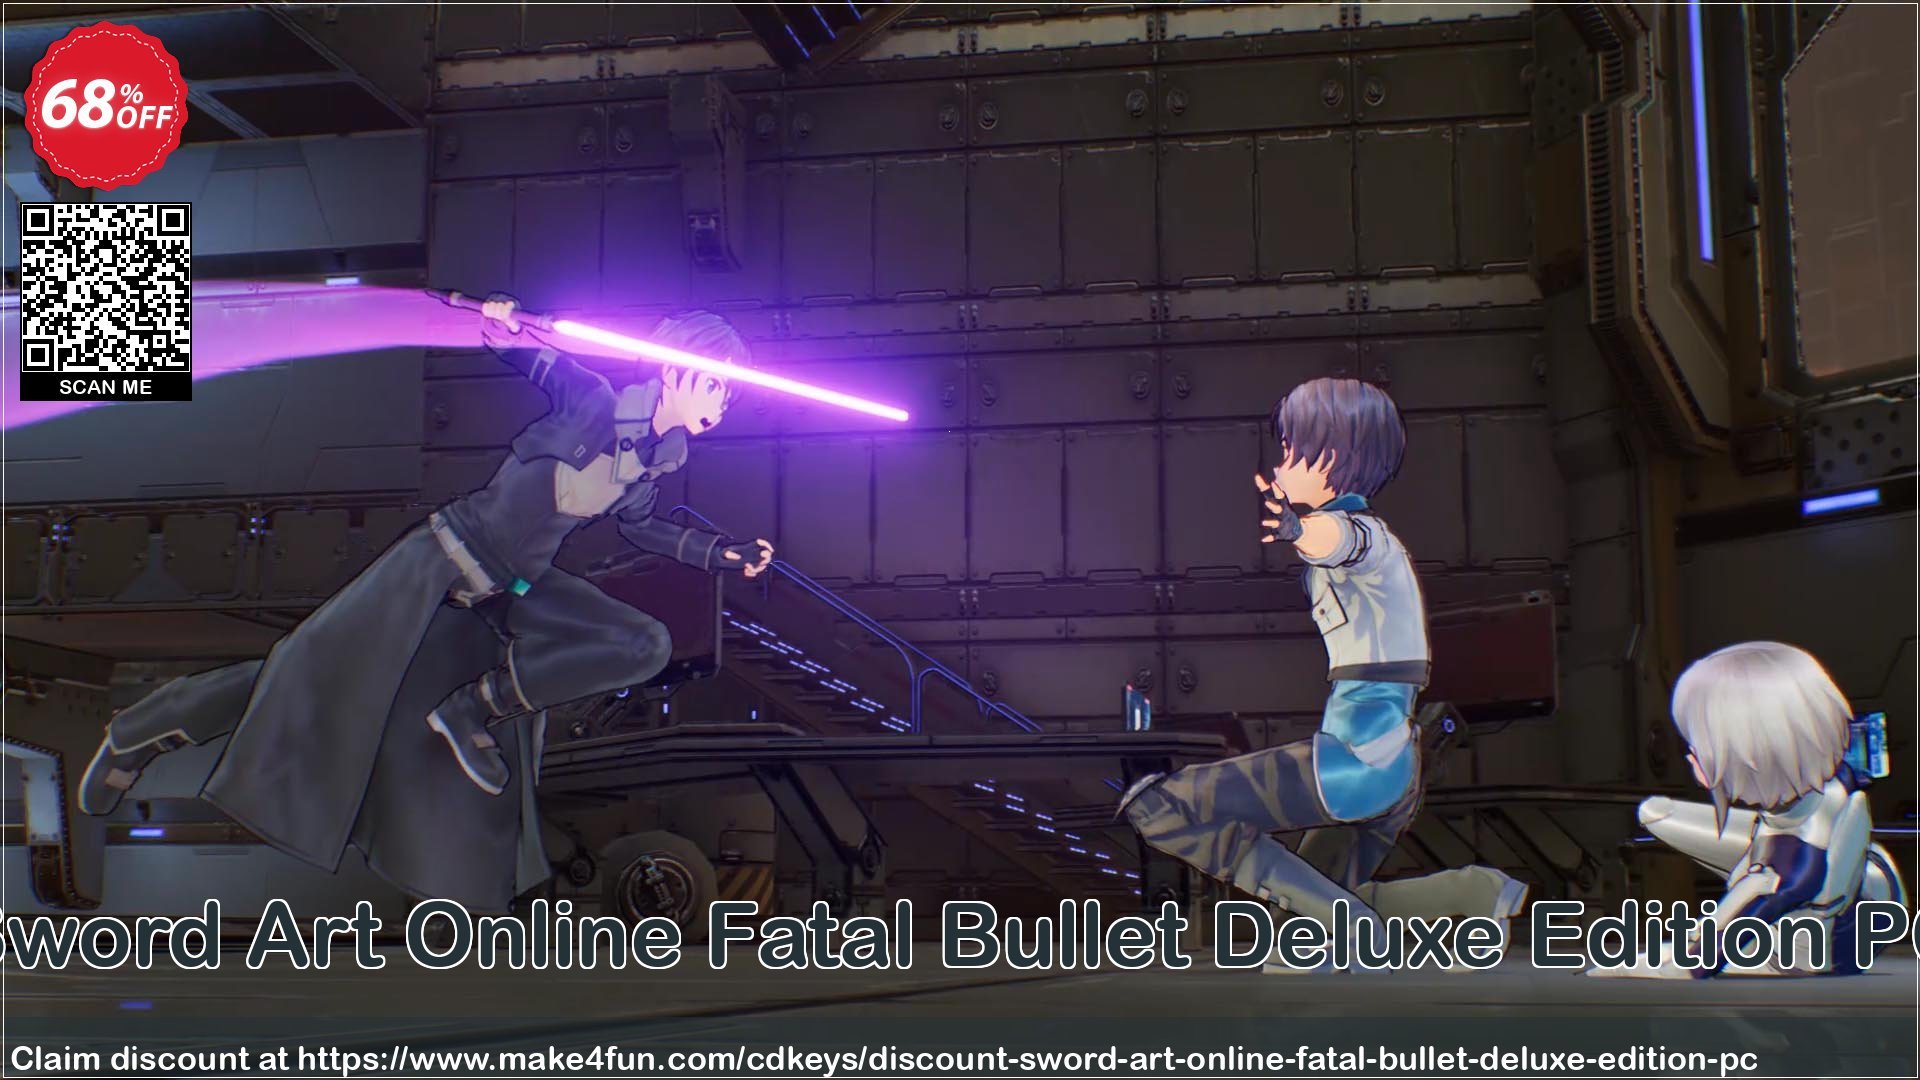 Sword art online fatal bullet deluxe edition pc coupon codes for High Five Extravaganza with 70% OFF, May 2024 - Make4fun